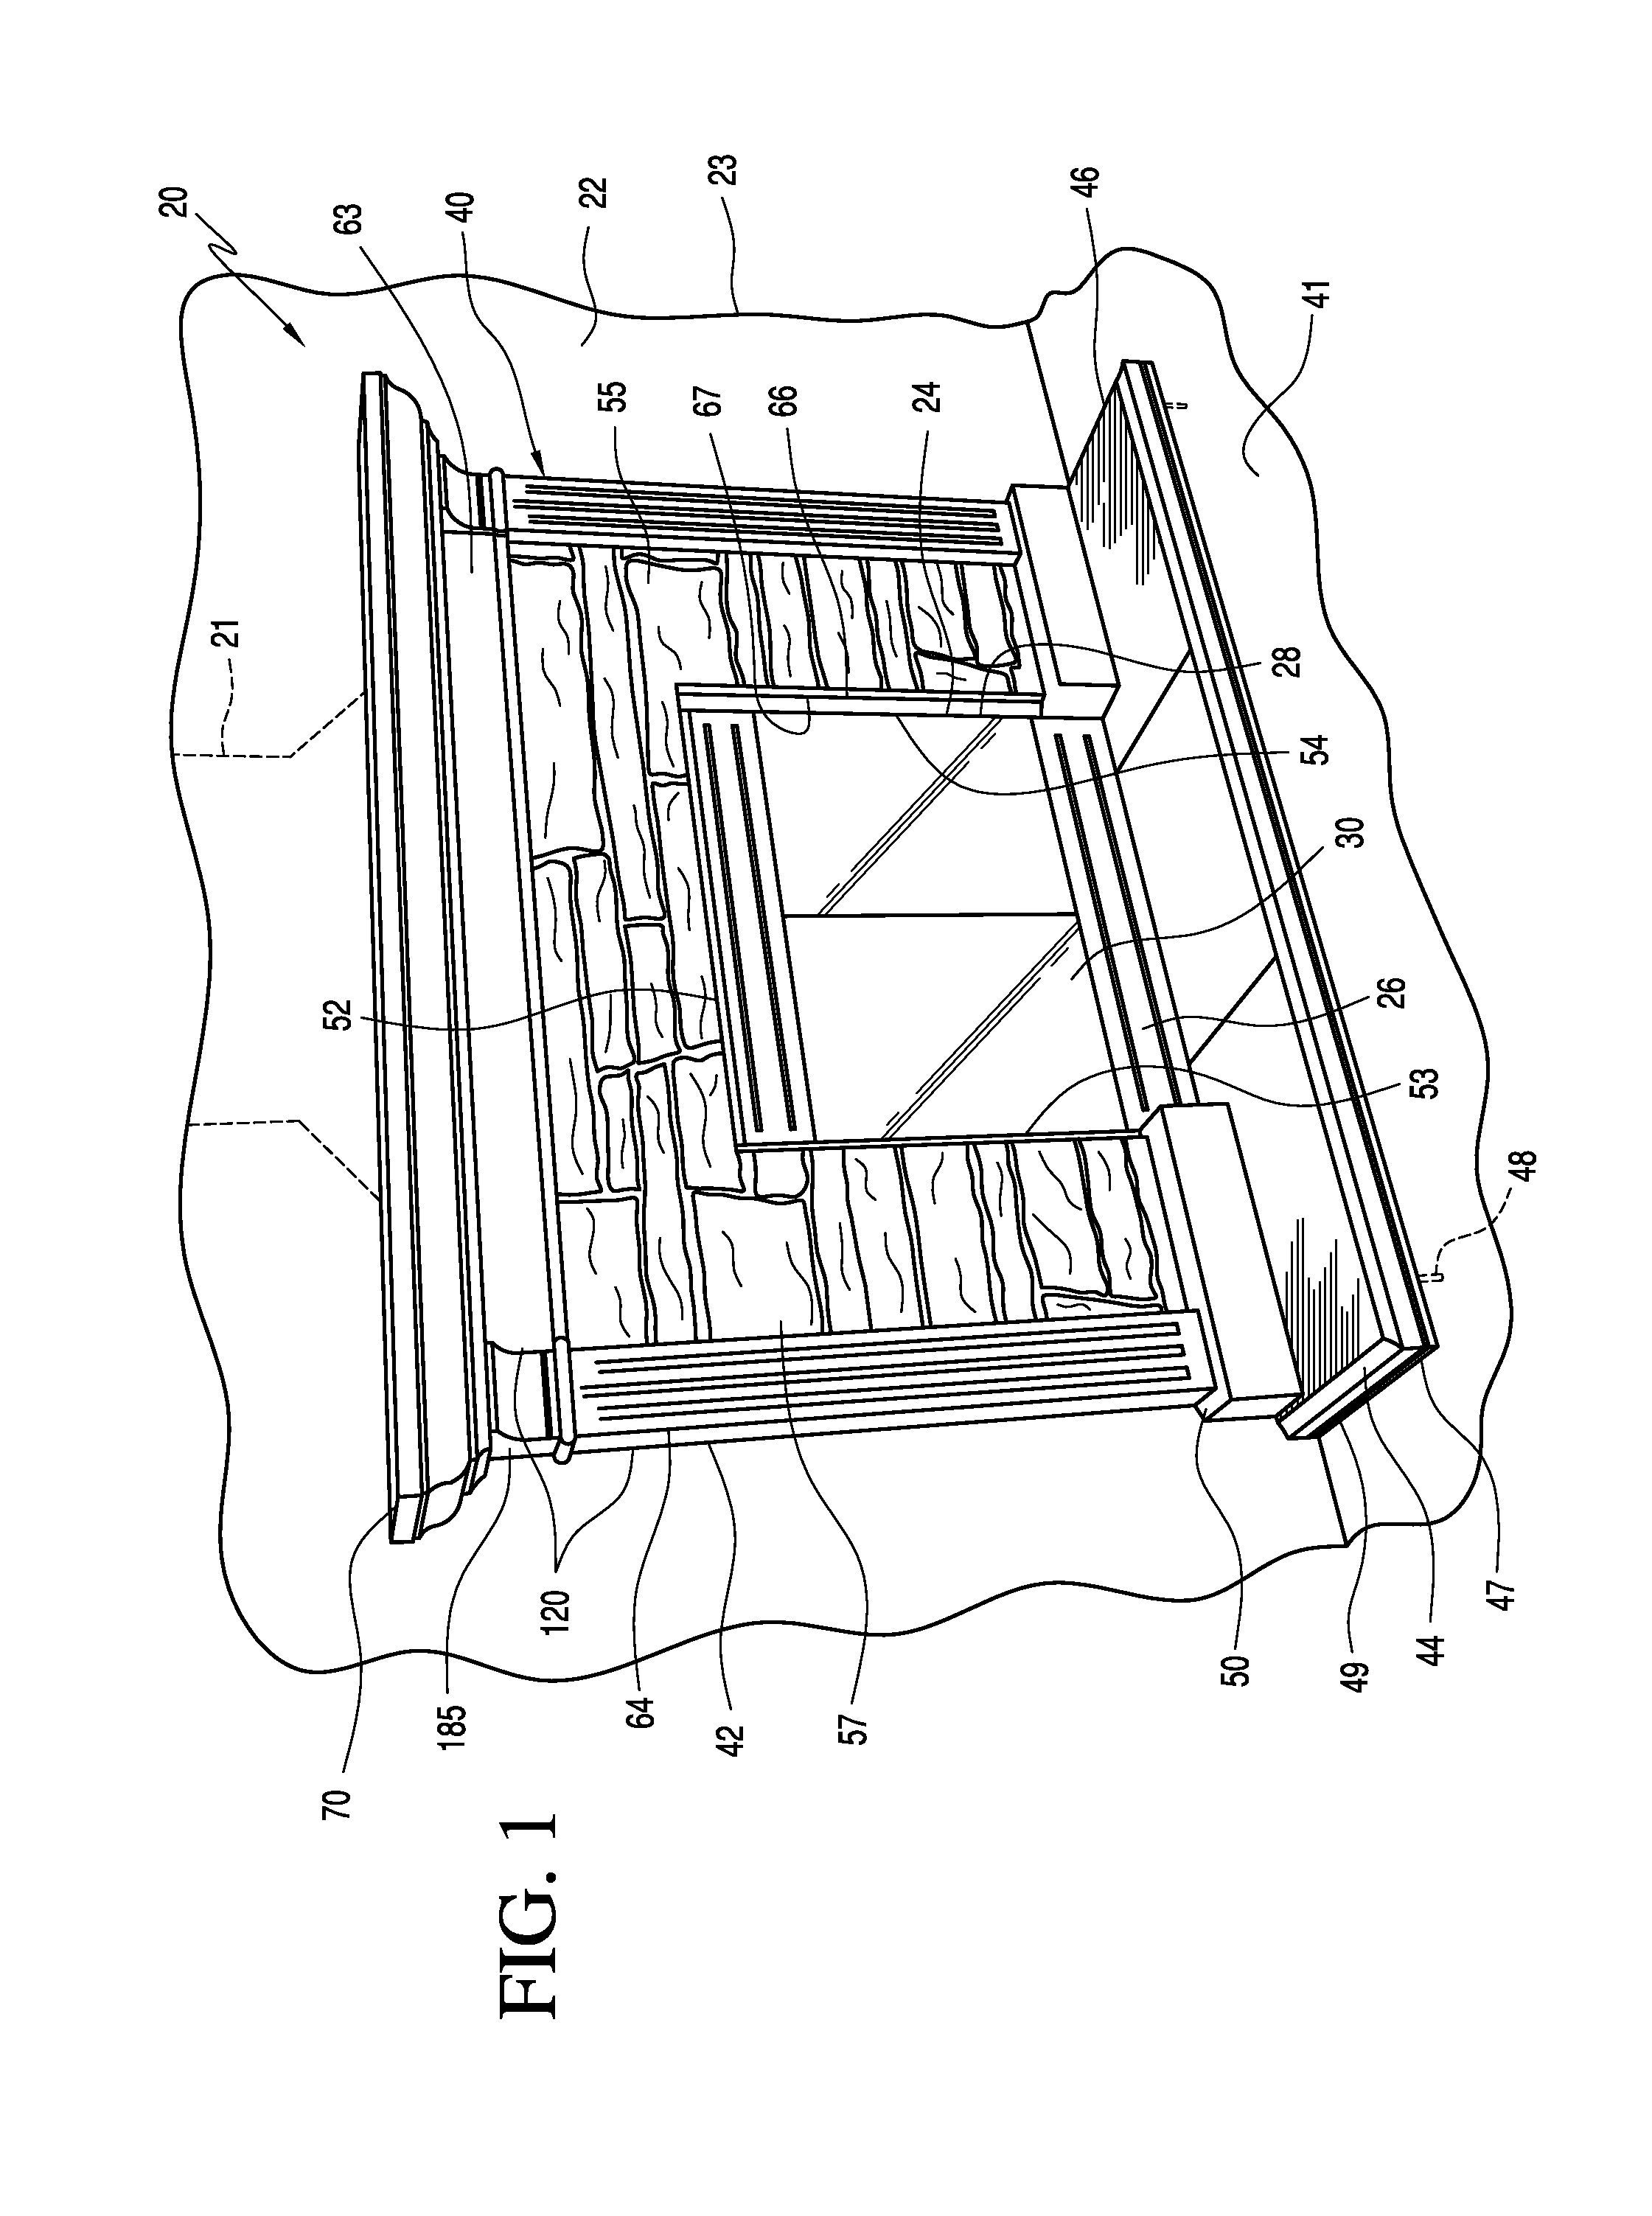 Fireplace surround system and method of making same